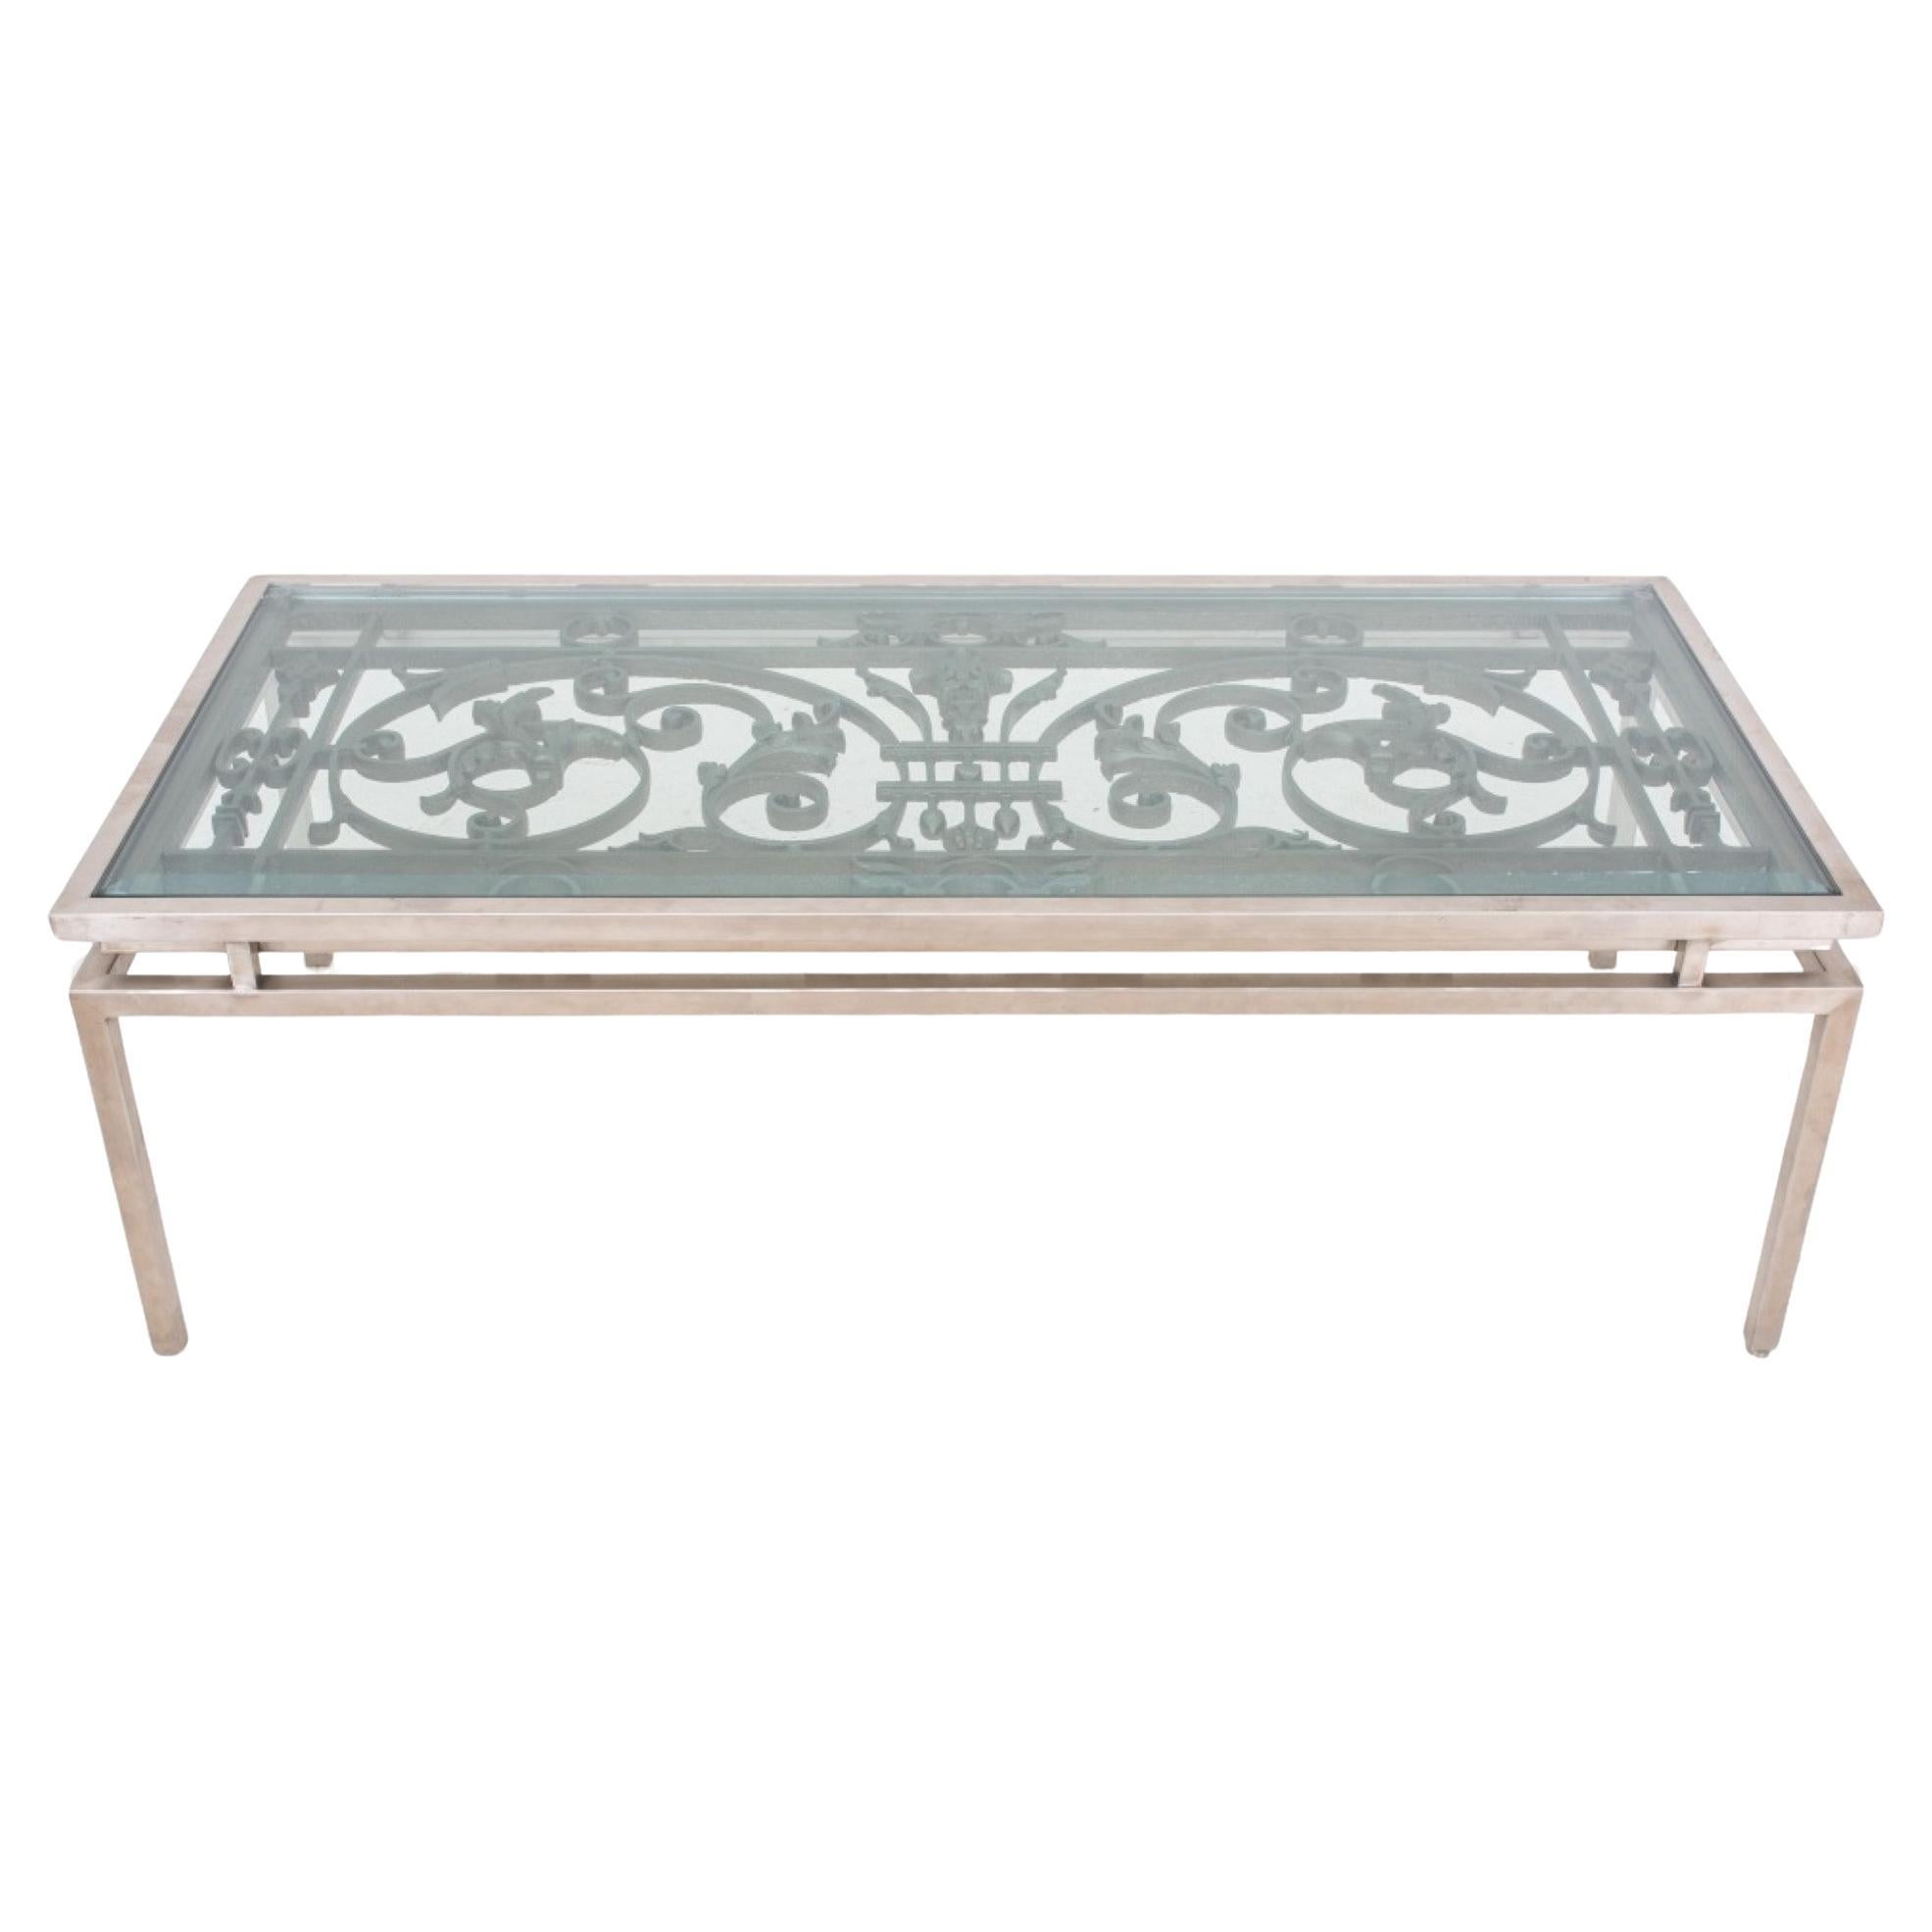 French Architectural Element Low Table